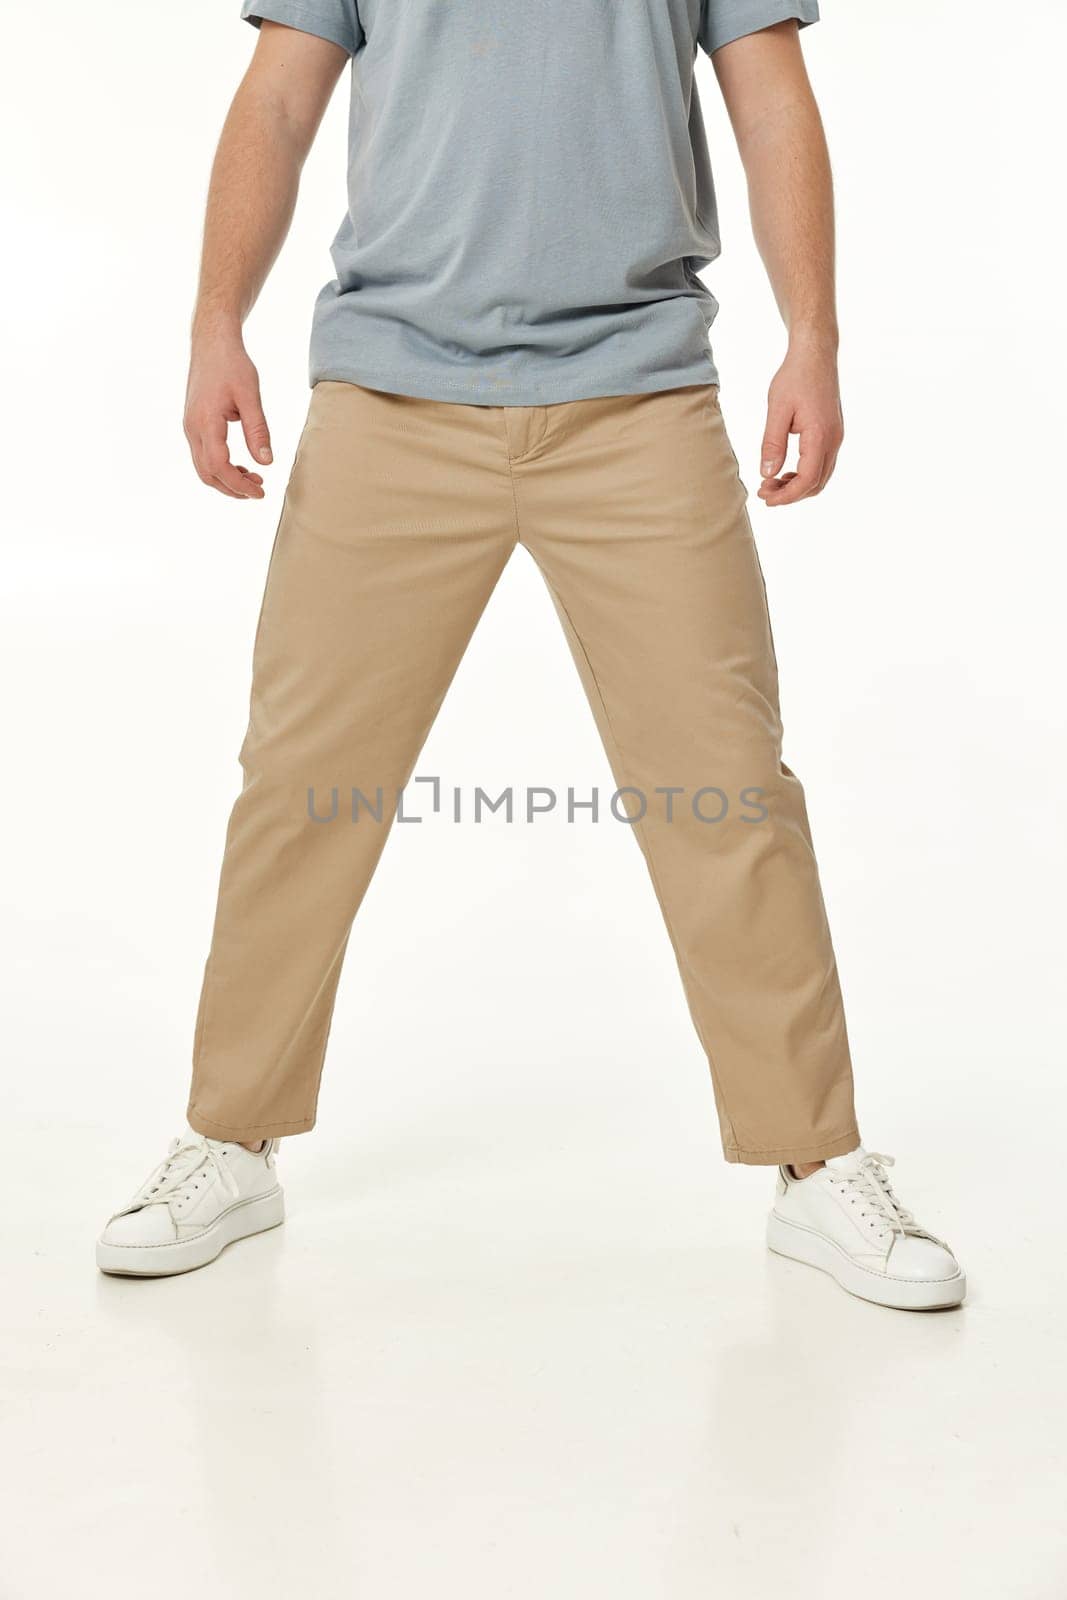 man wearing white sneakers and casual beige pants by erstudio